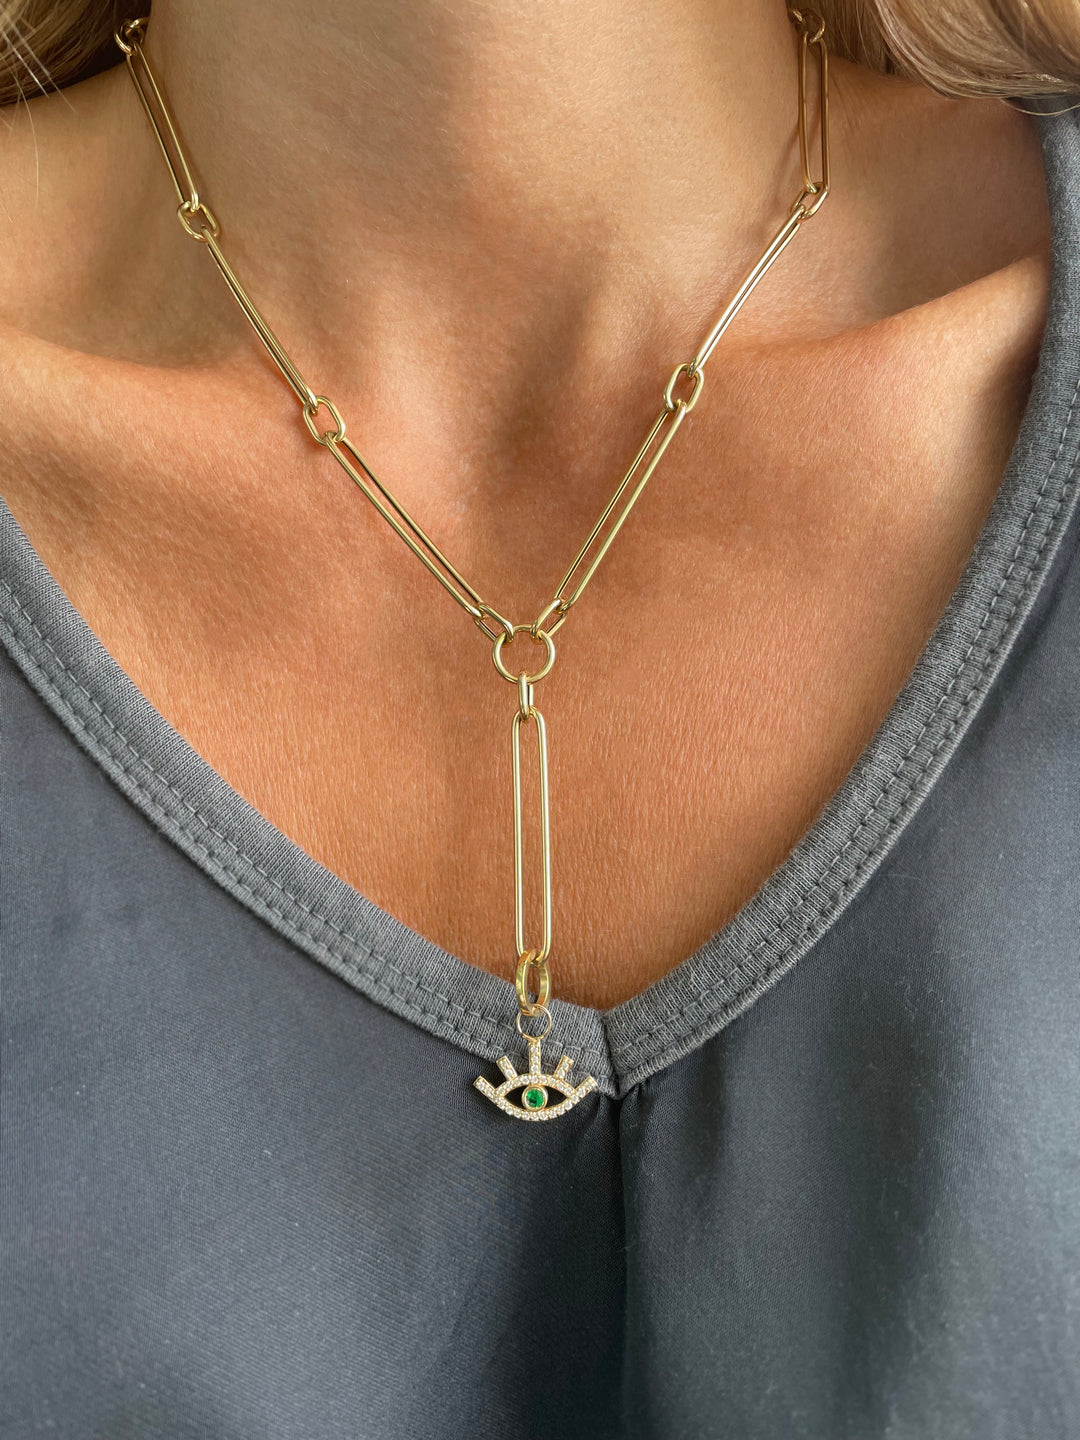 Long Links of Love Lariat Necklace